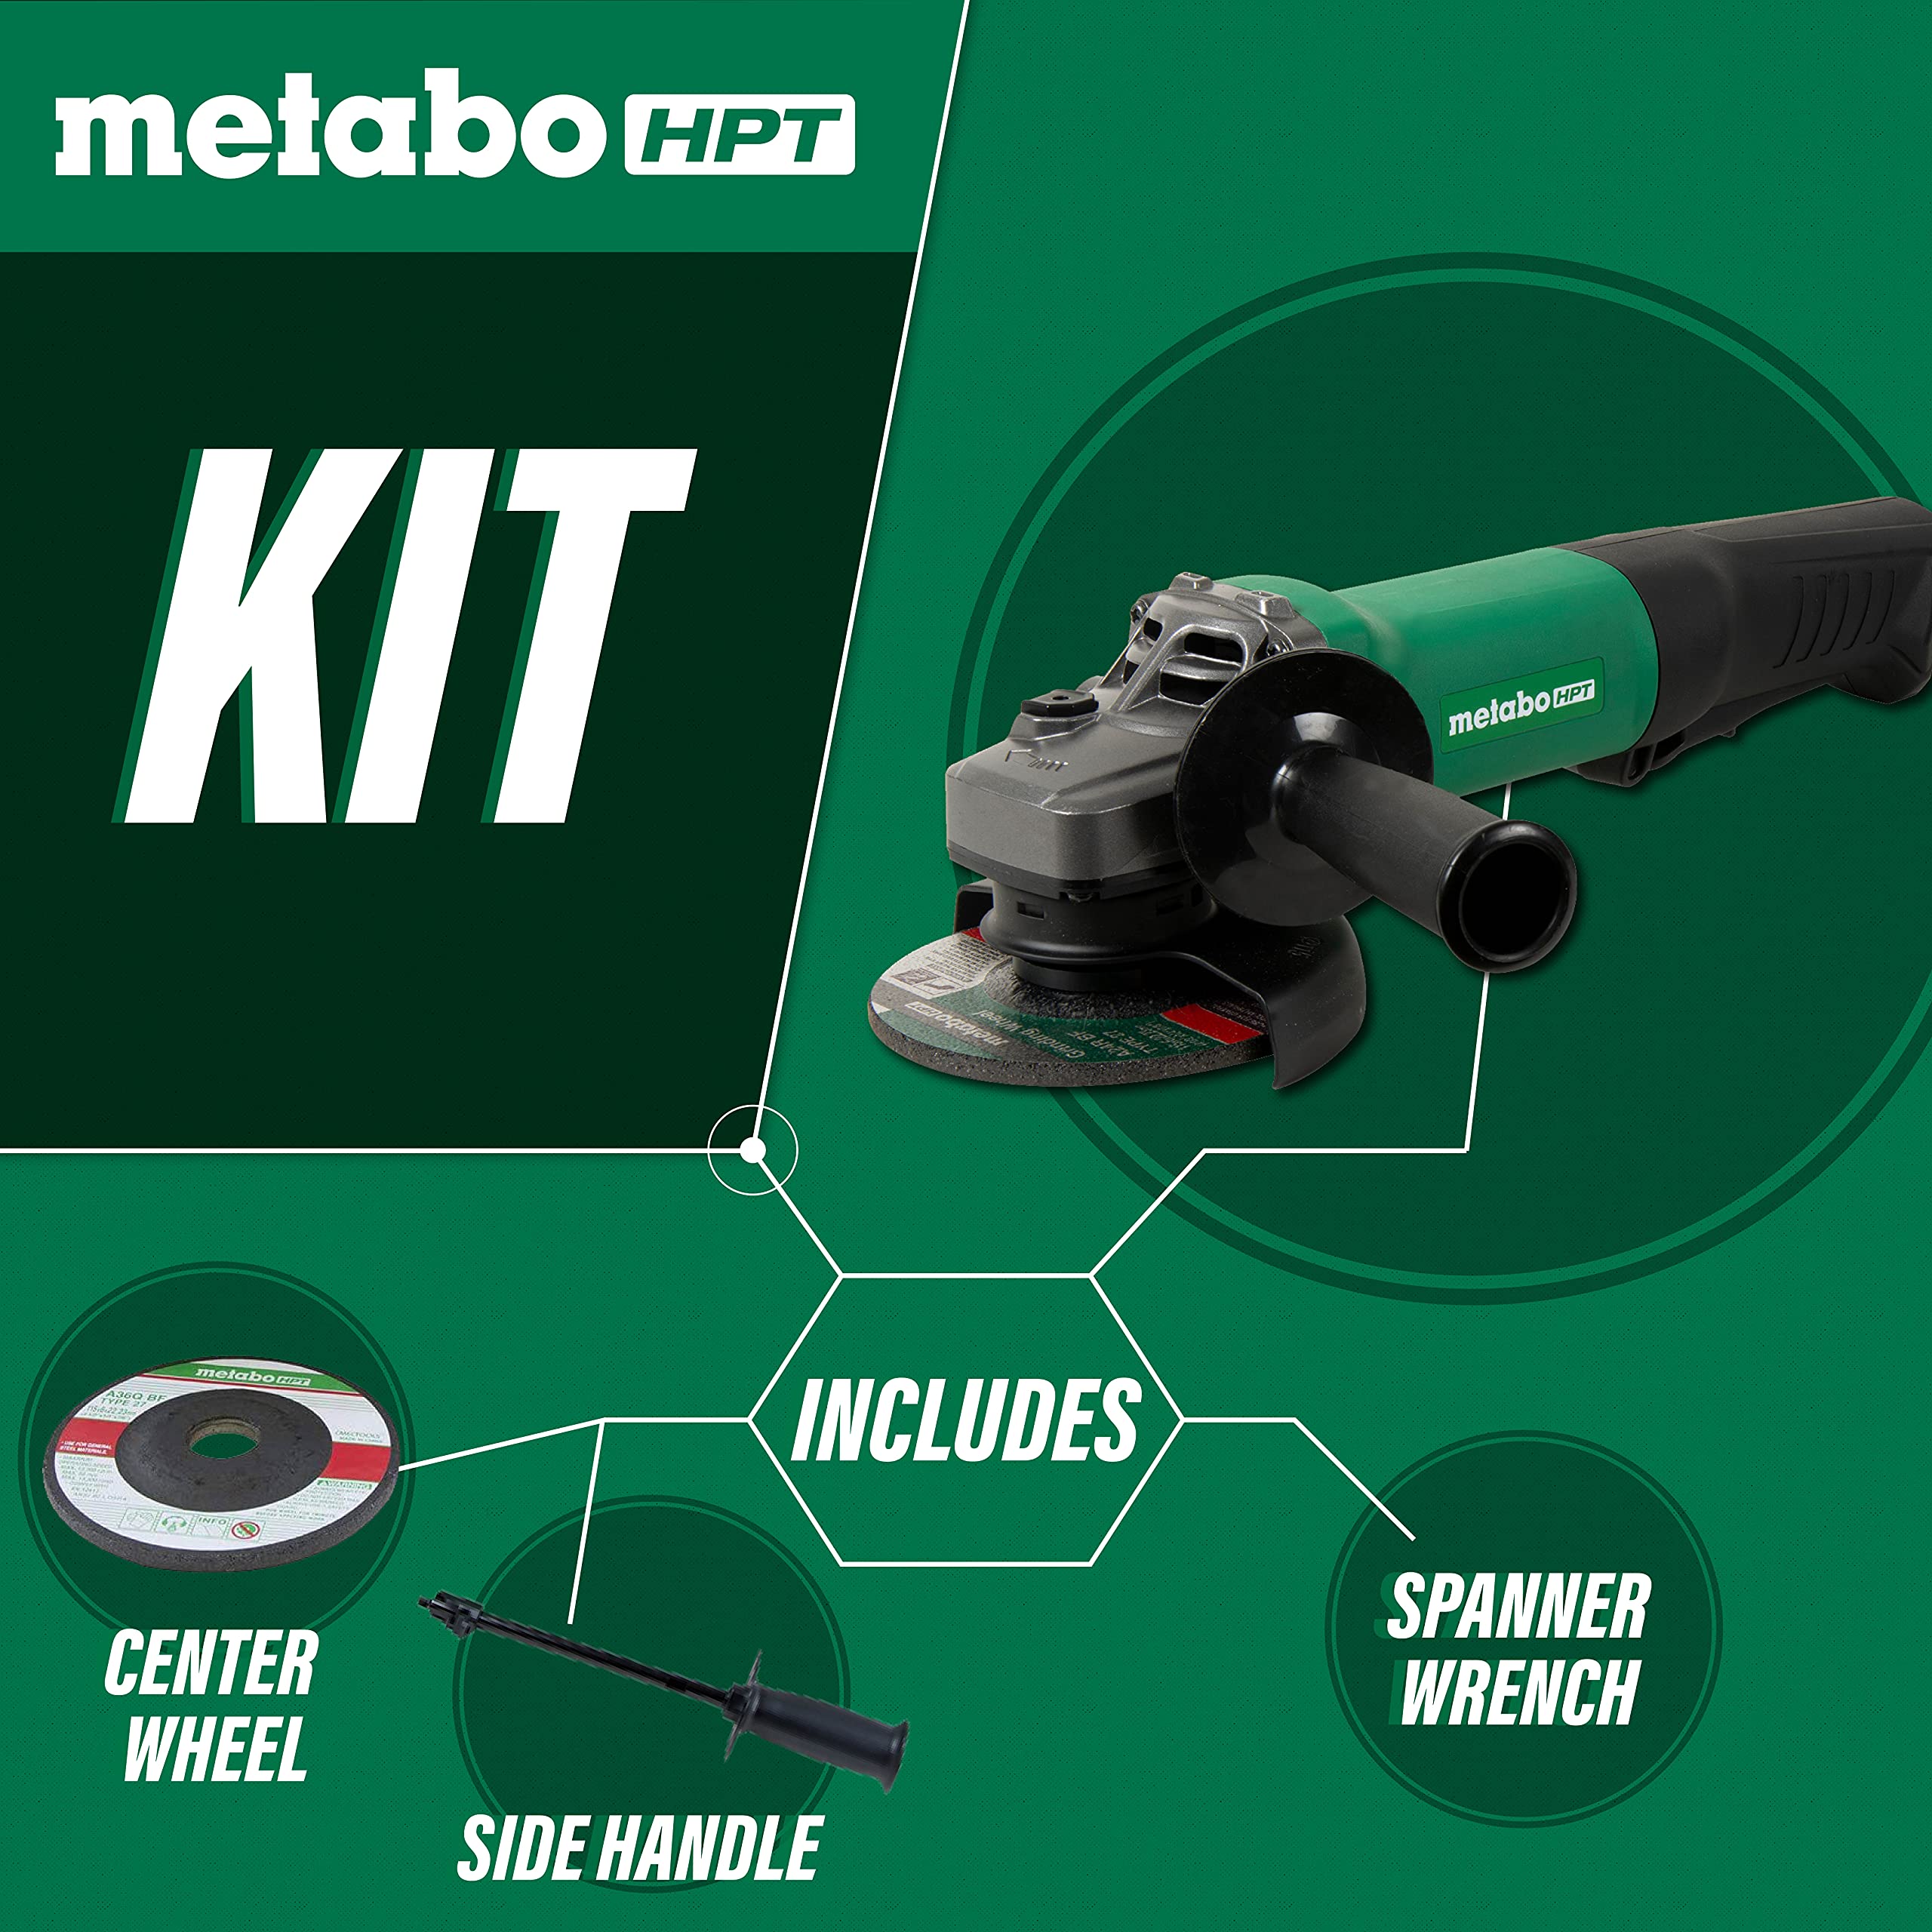 Metabo HPT – TTS Products